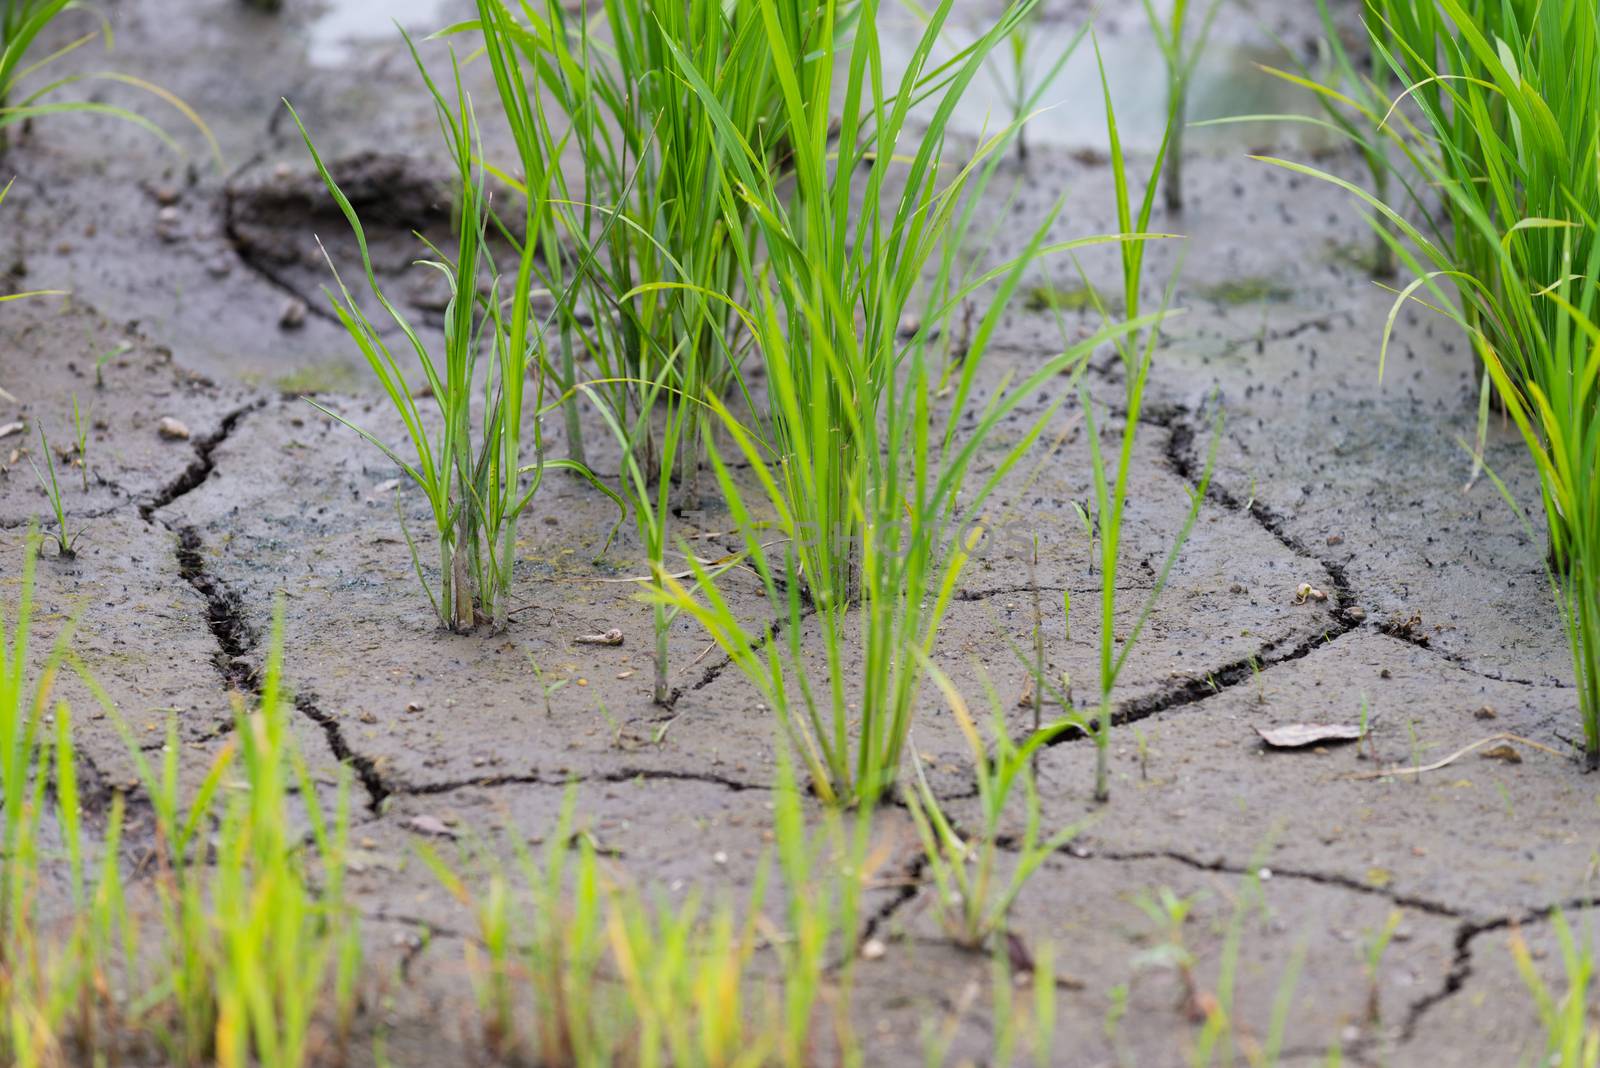 Small rice plants growing in a field with dried cracked mud.